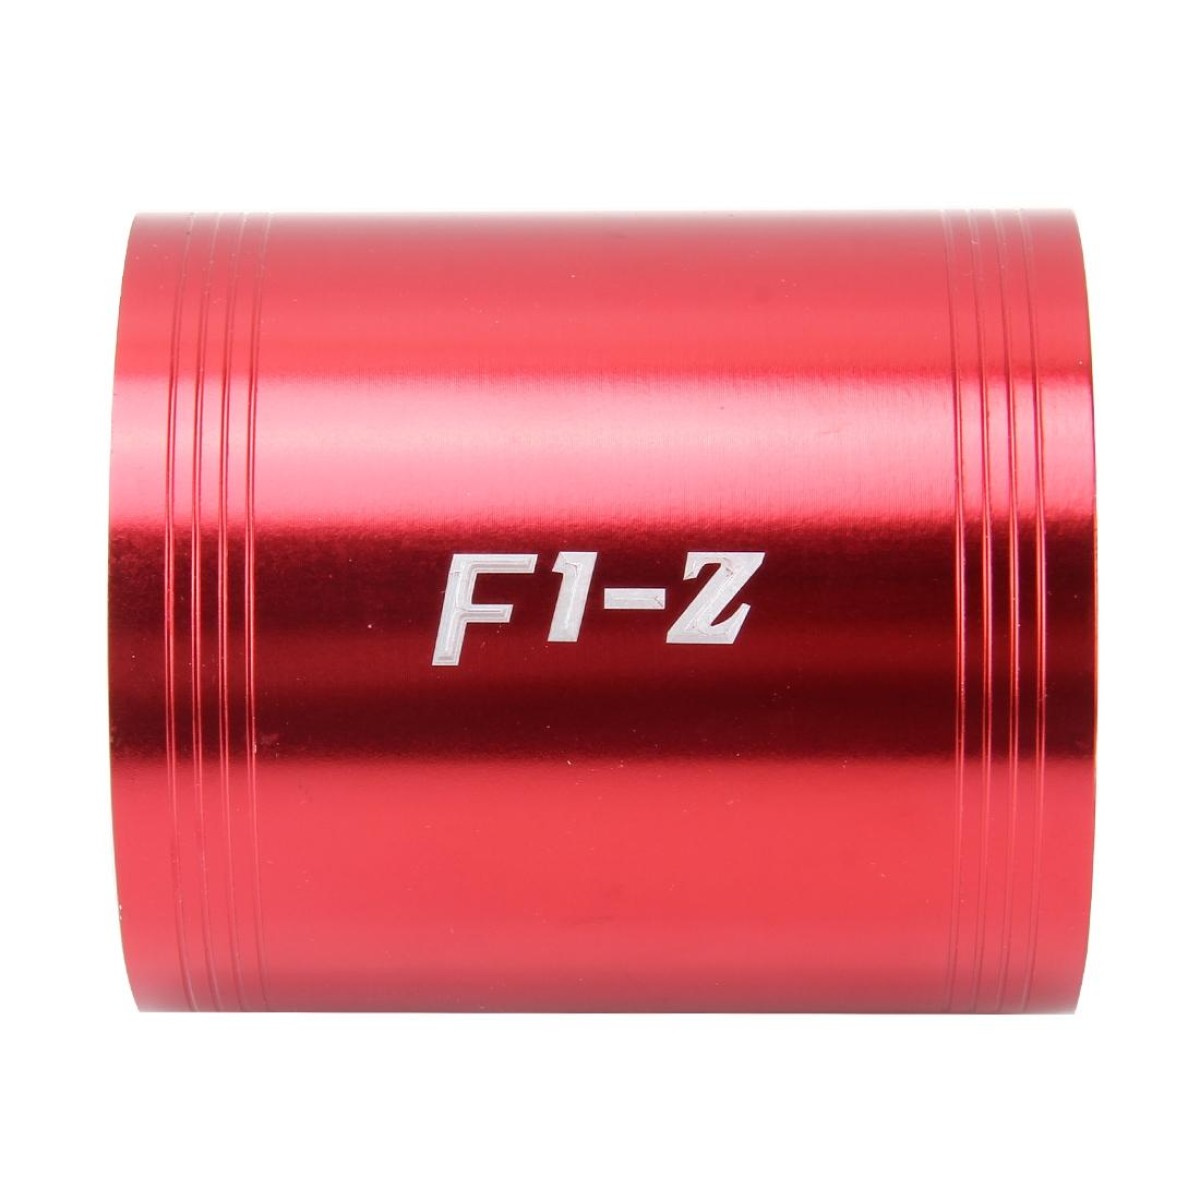 F1-Z Car Stainless Universal Supercharger Dual Double Turbine Air Intake Fuel Saver Turbo Turboing Charger Fan Set kit(Red)